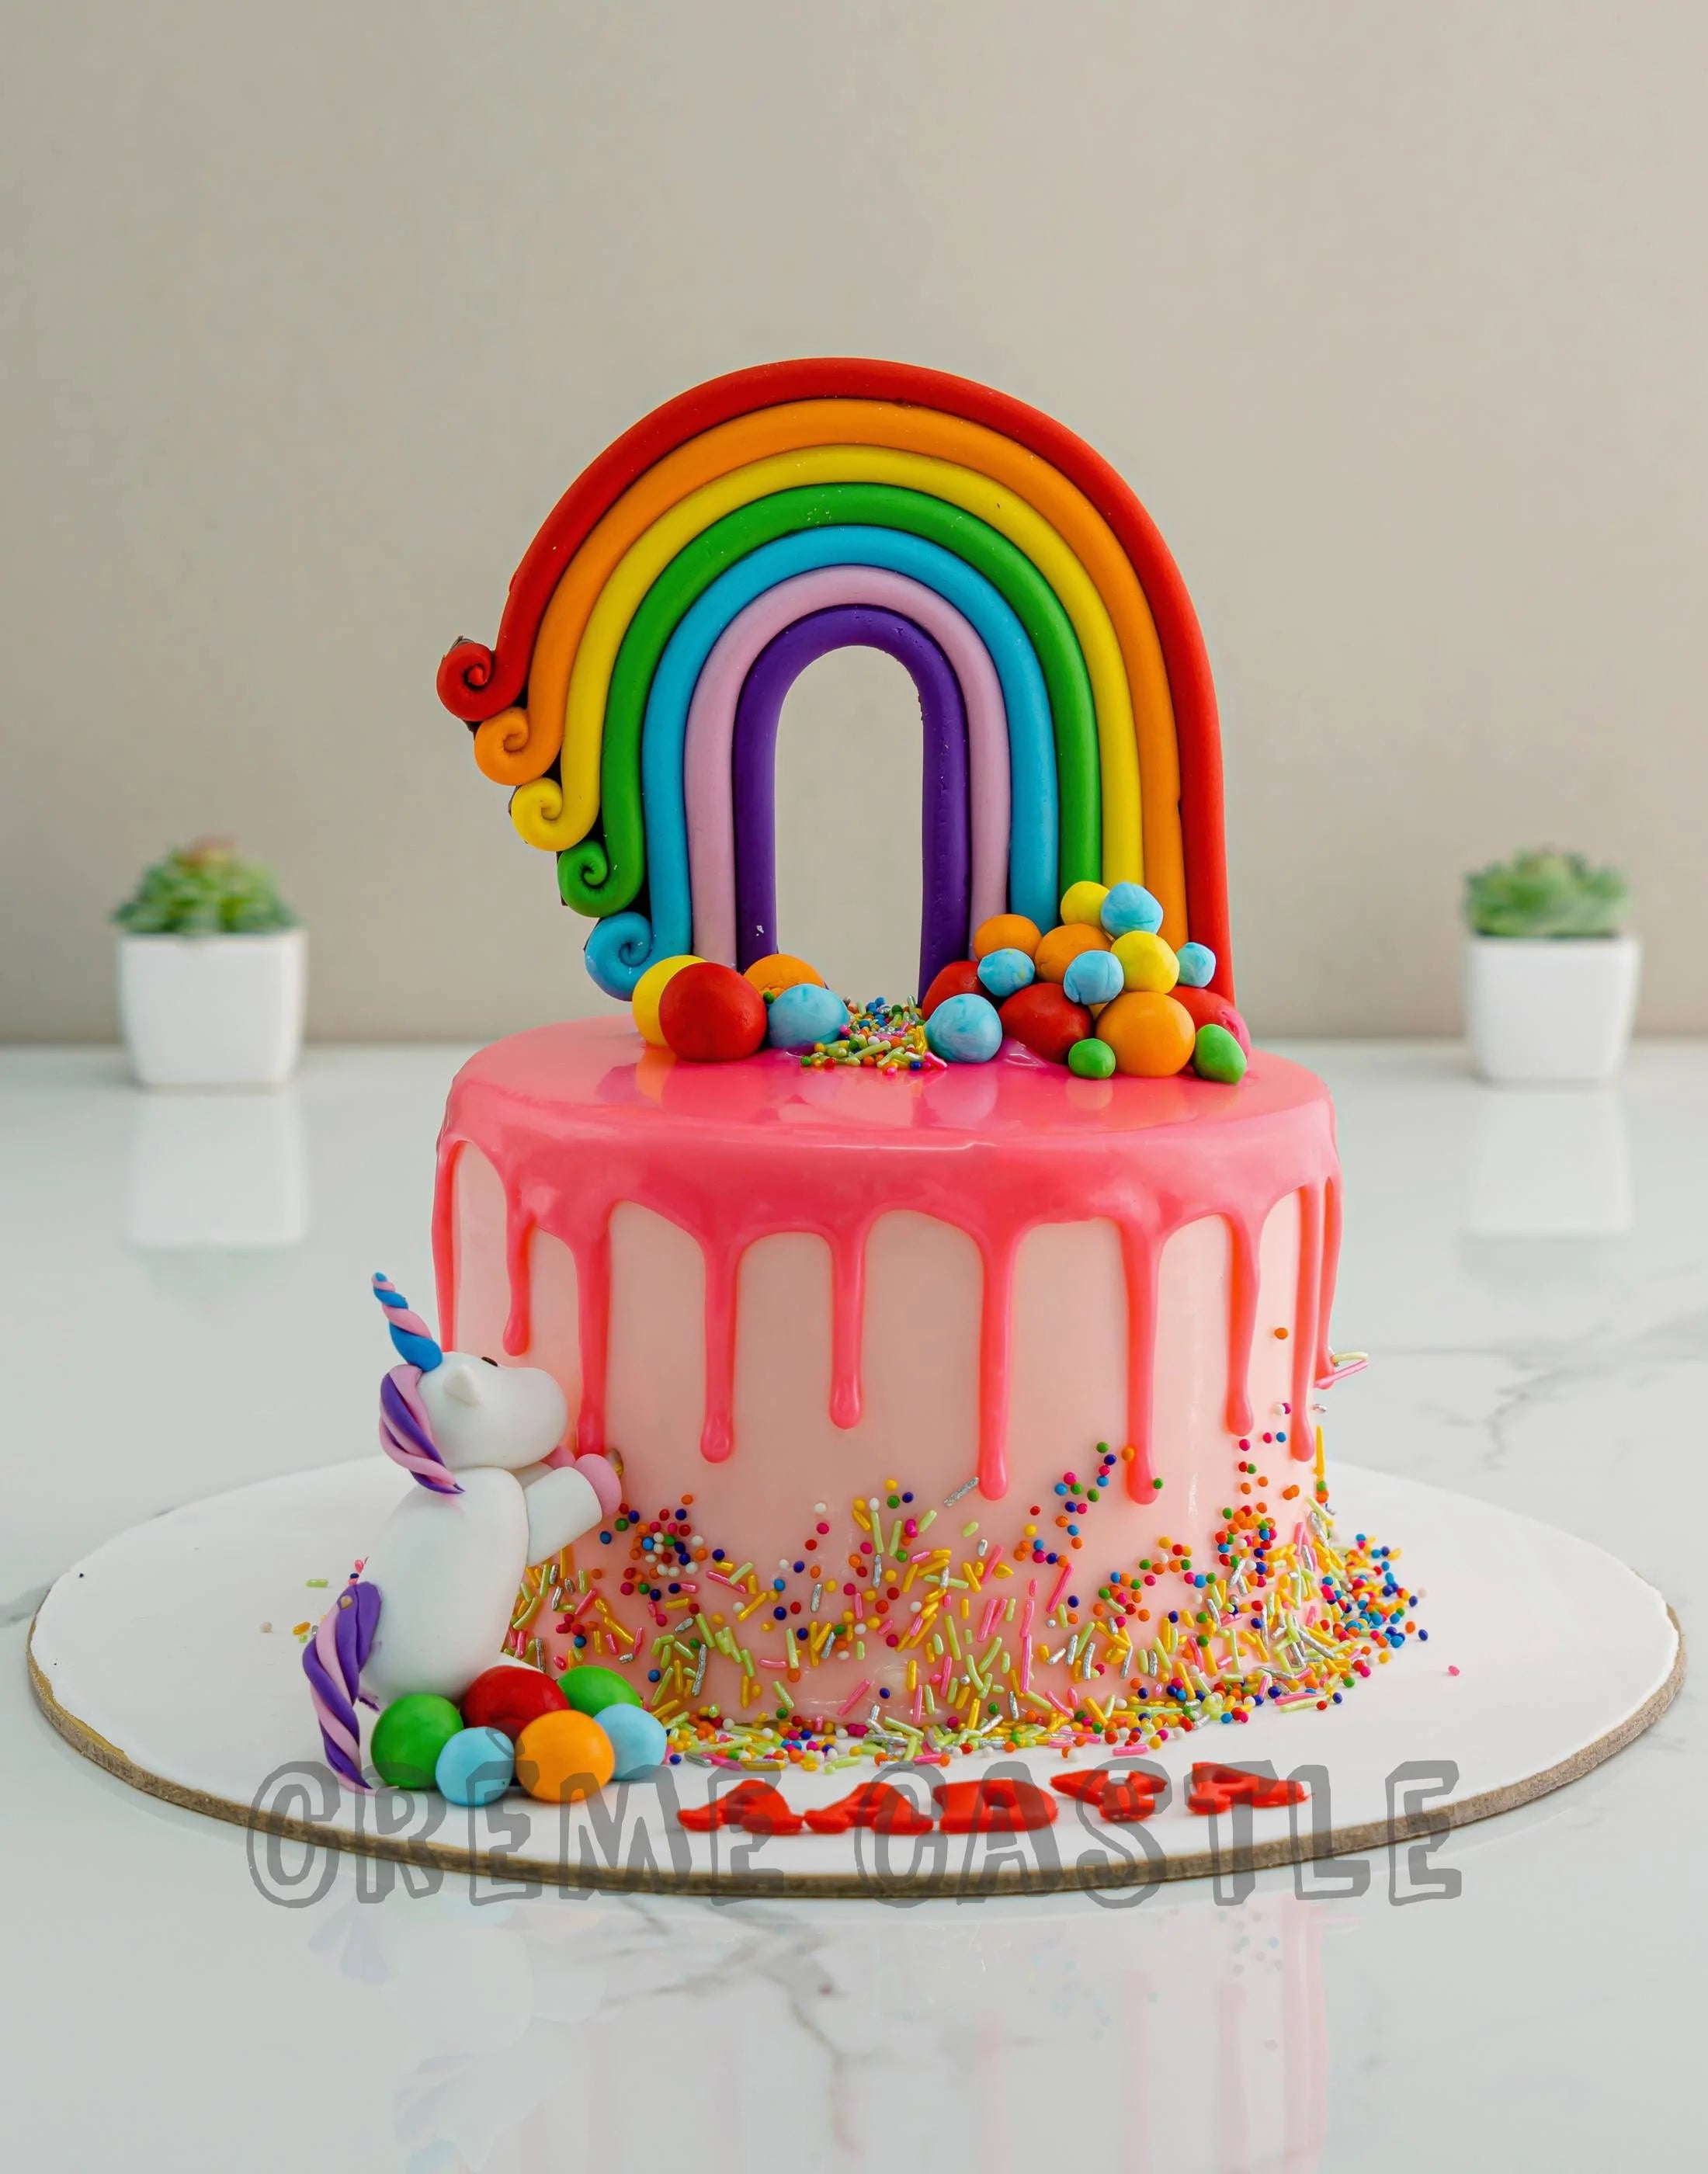 How To Make a Rainbow Layer Cake with a Candy Surprise Inside | The Kitchn